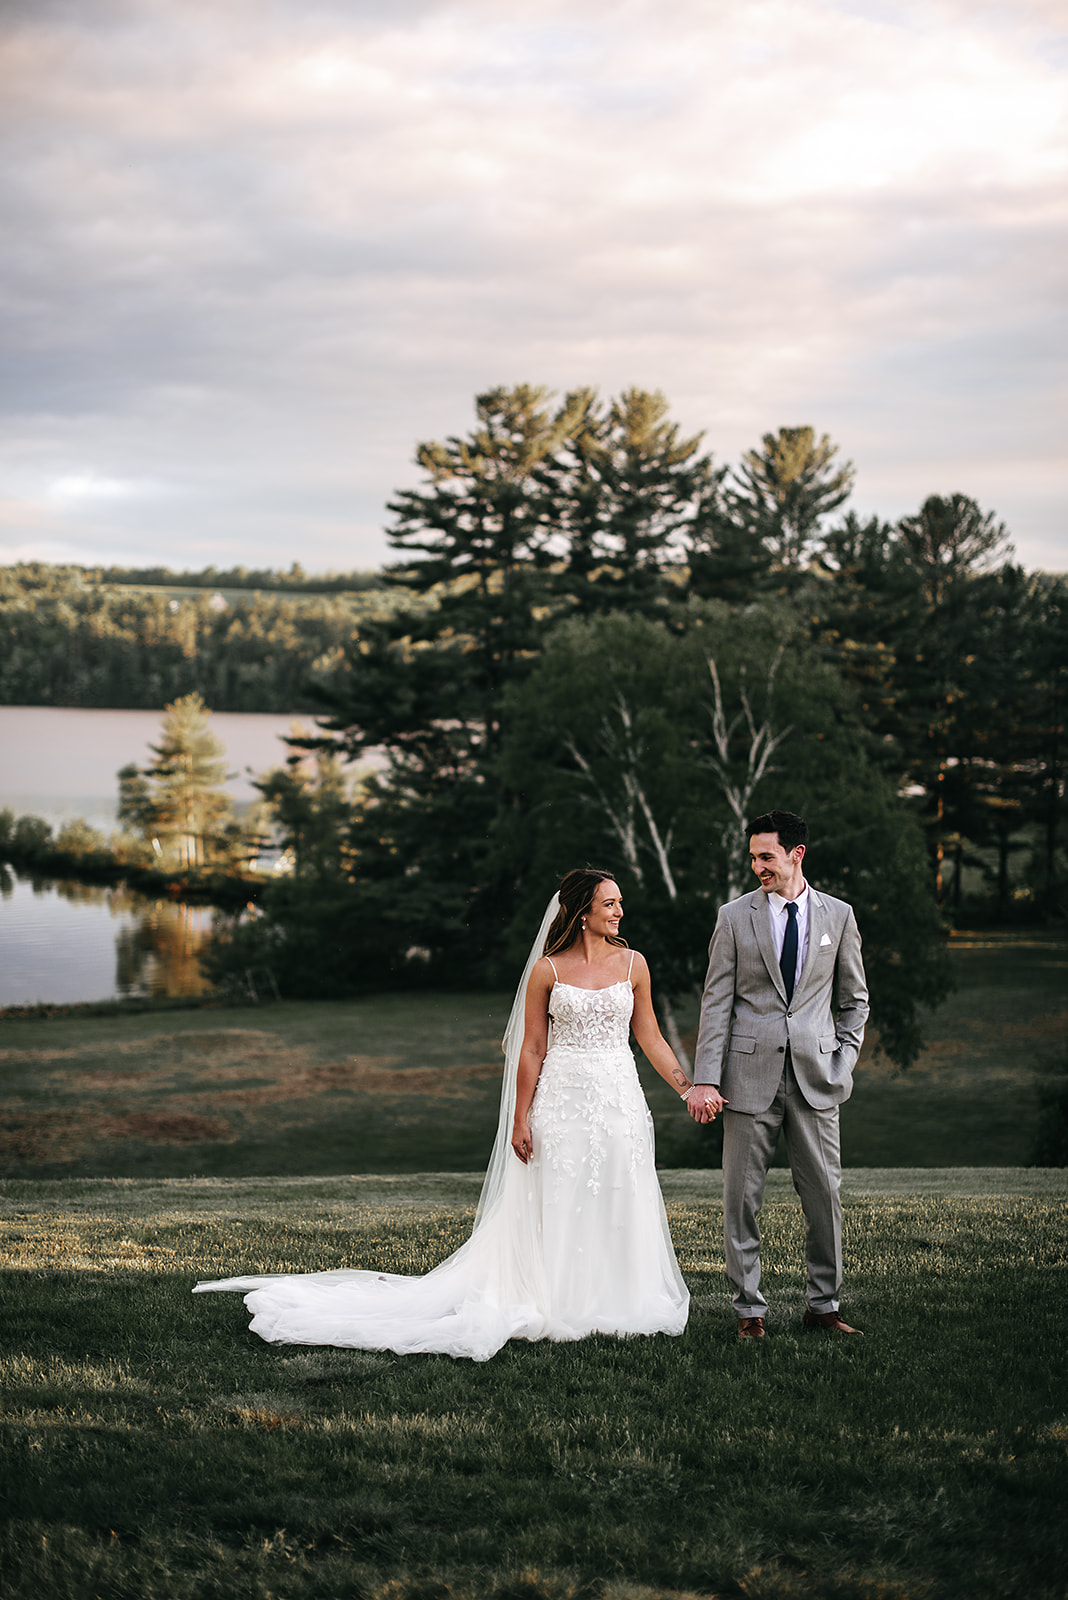 A beautiful wedding at Bear Mountain Inn located in Waterford, Maine. The scenery was stunning, with a picturesque Bear 